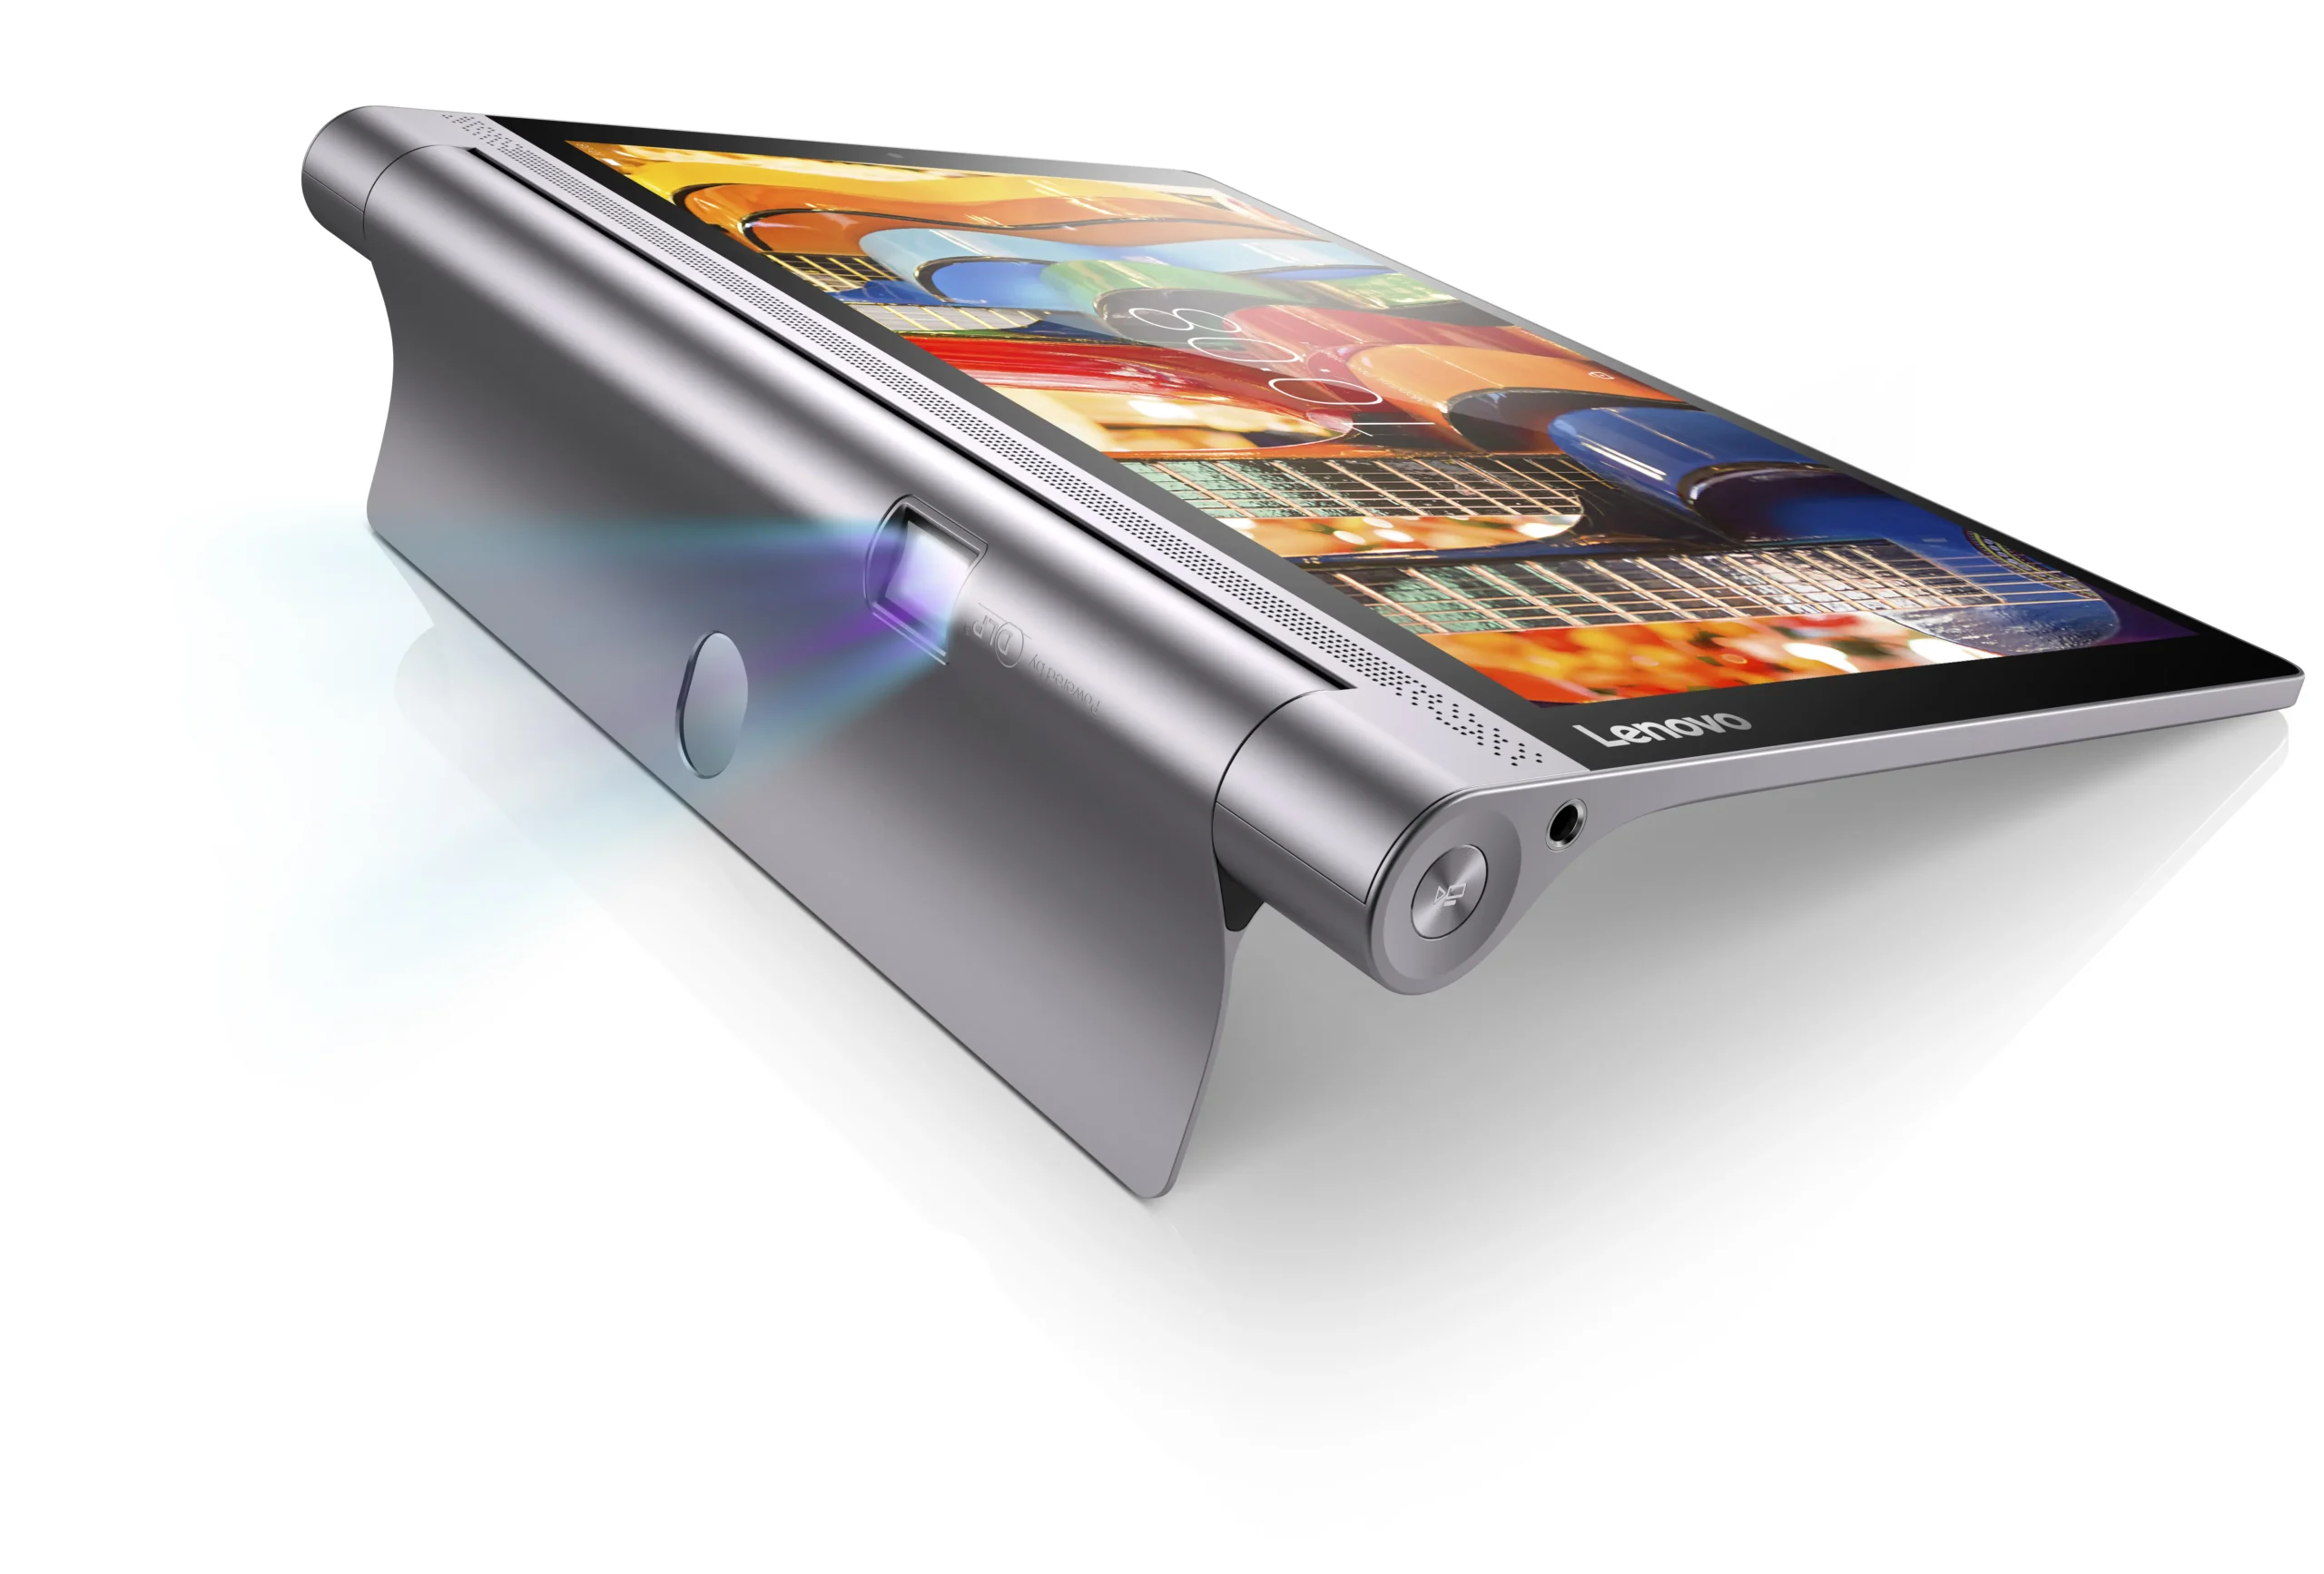 yoga tab projector - Which Lenovo tablet has a projector